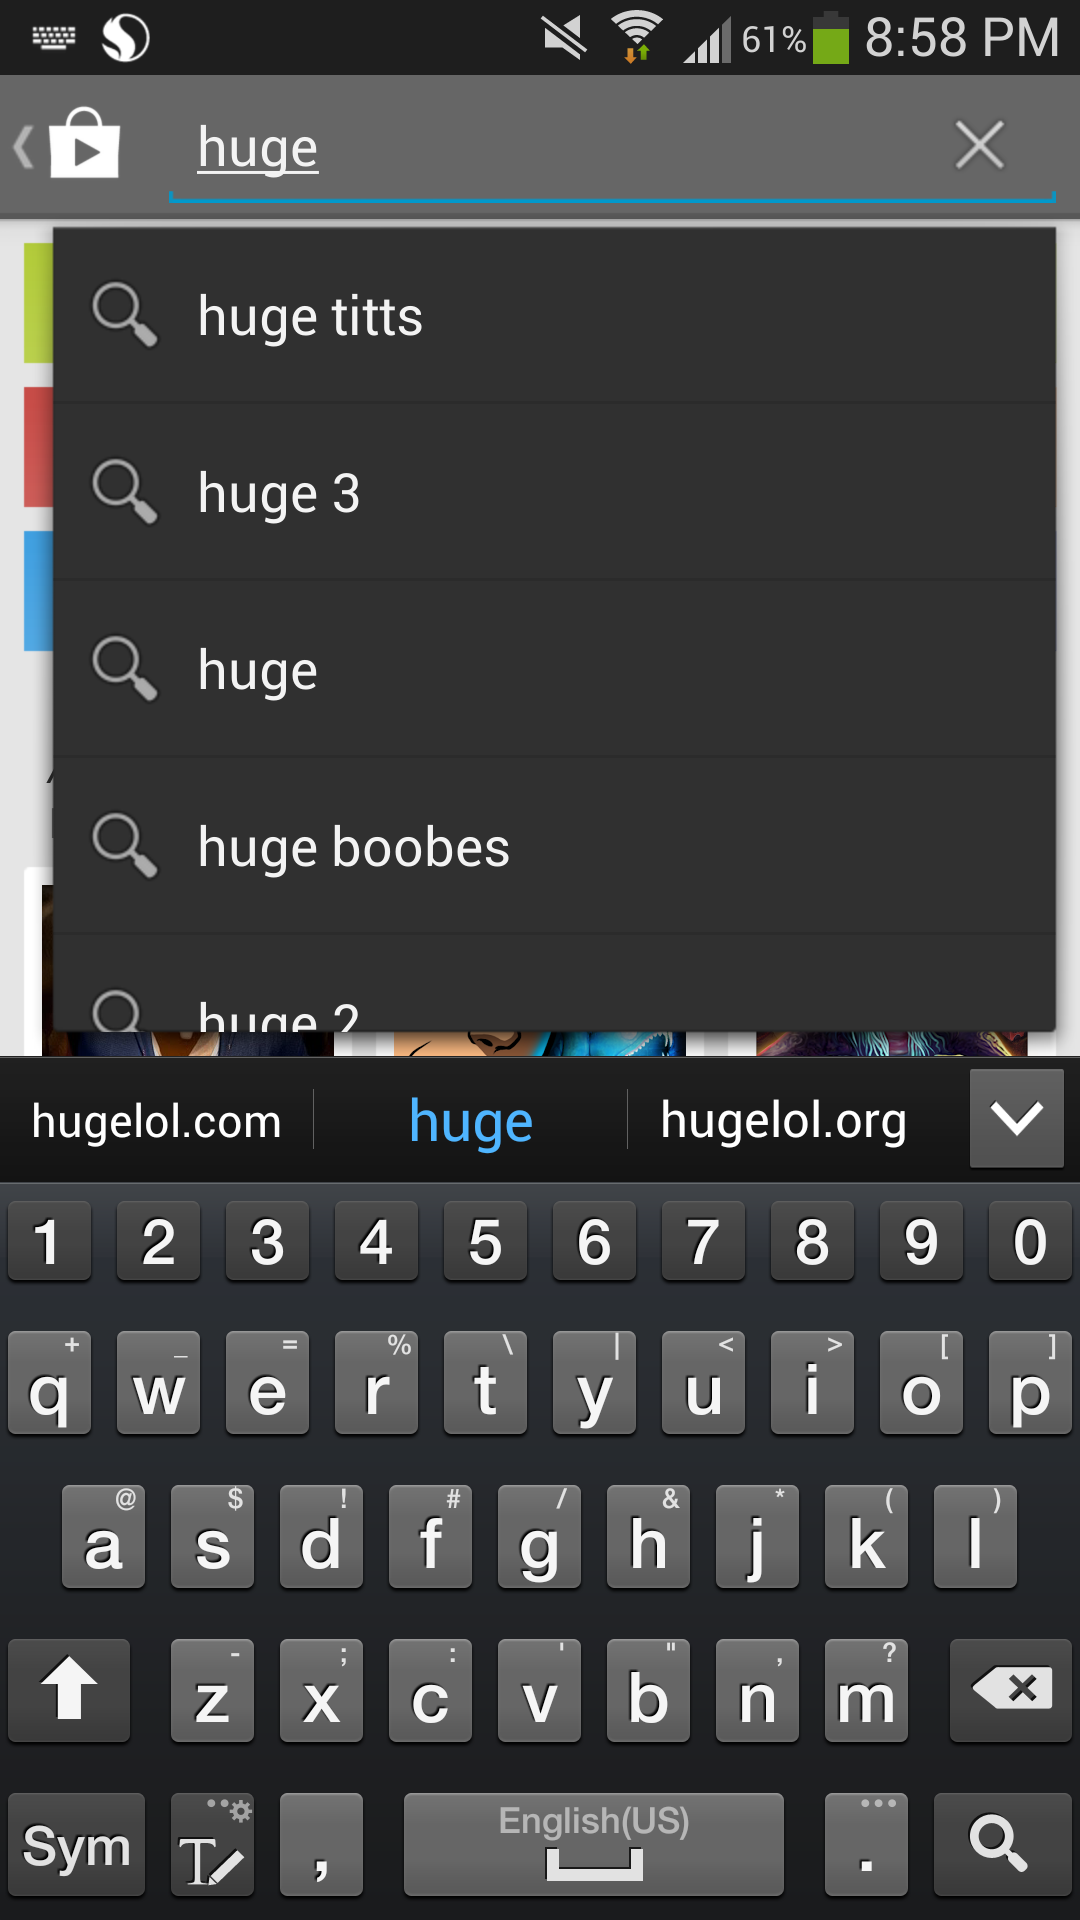 While searching for the app on the play store. What do people think they're going to see?